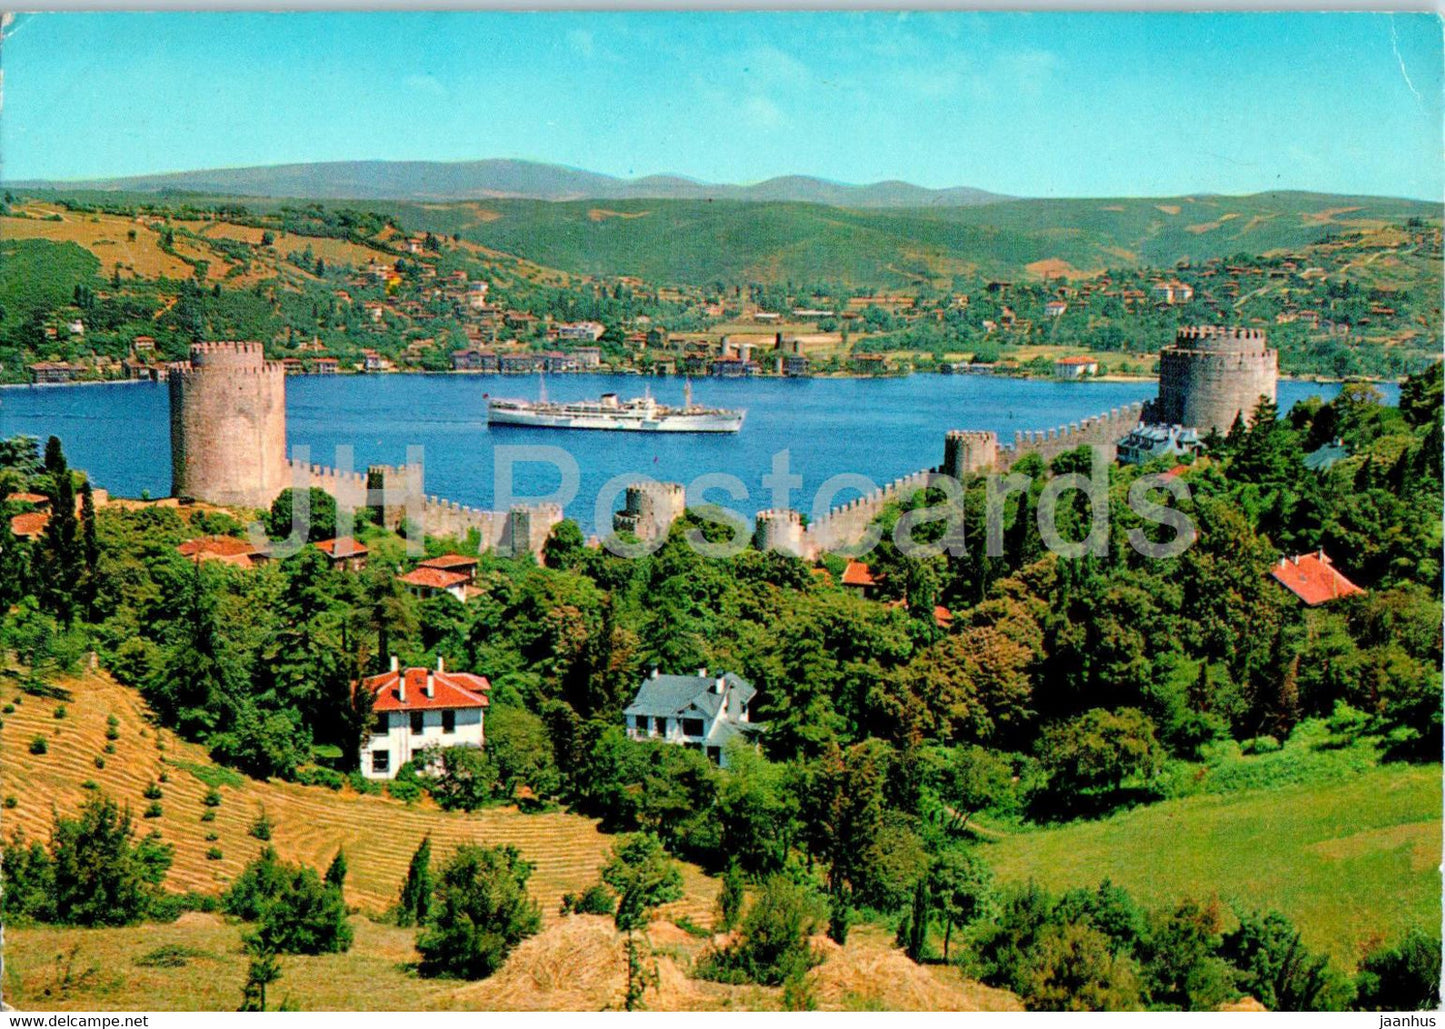 Istanbul - From Europe to Asia - The Fortress and the Bosphorus - 375 - Turkey - unused - JH Postcards